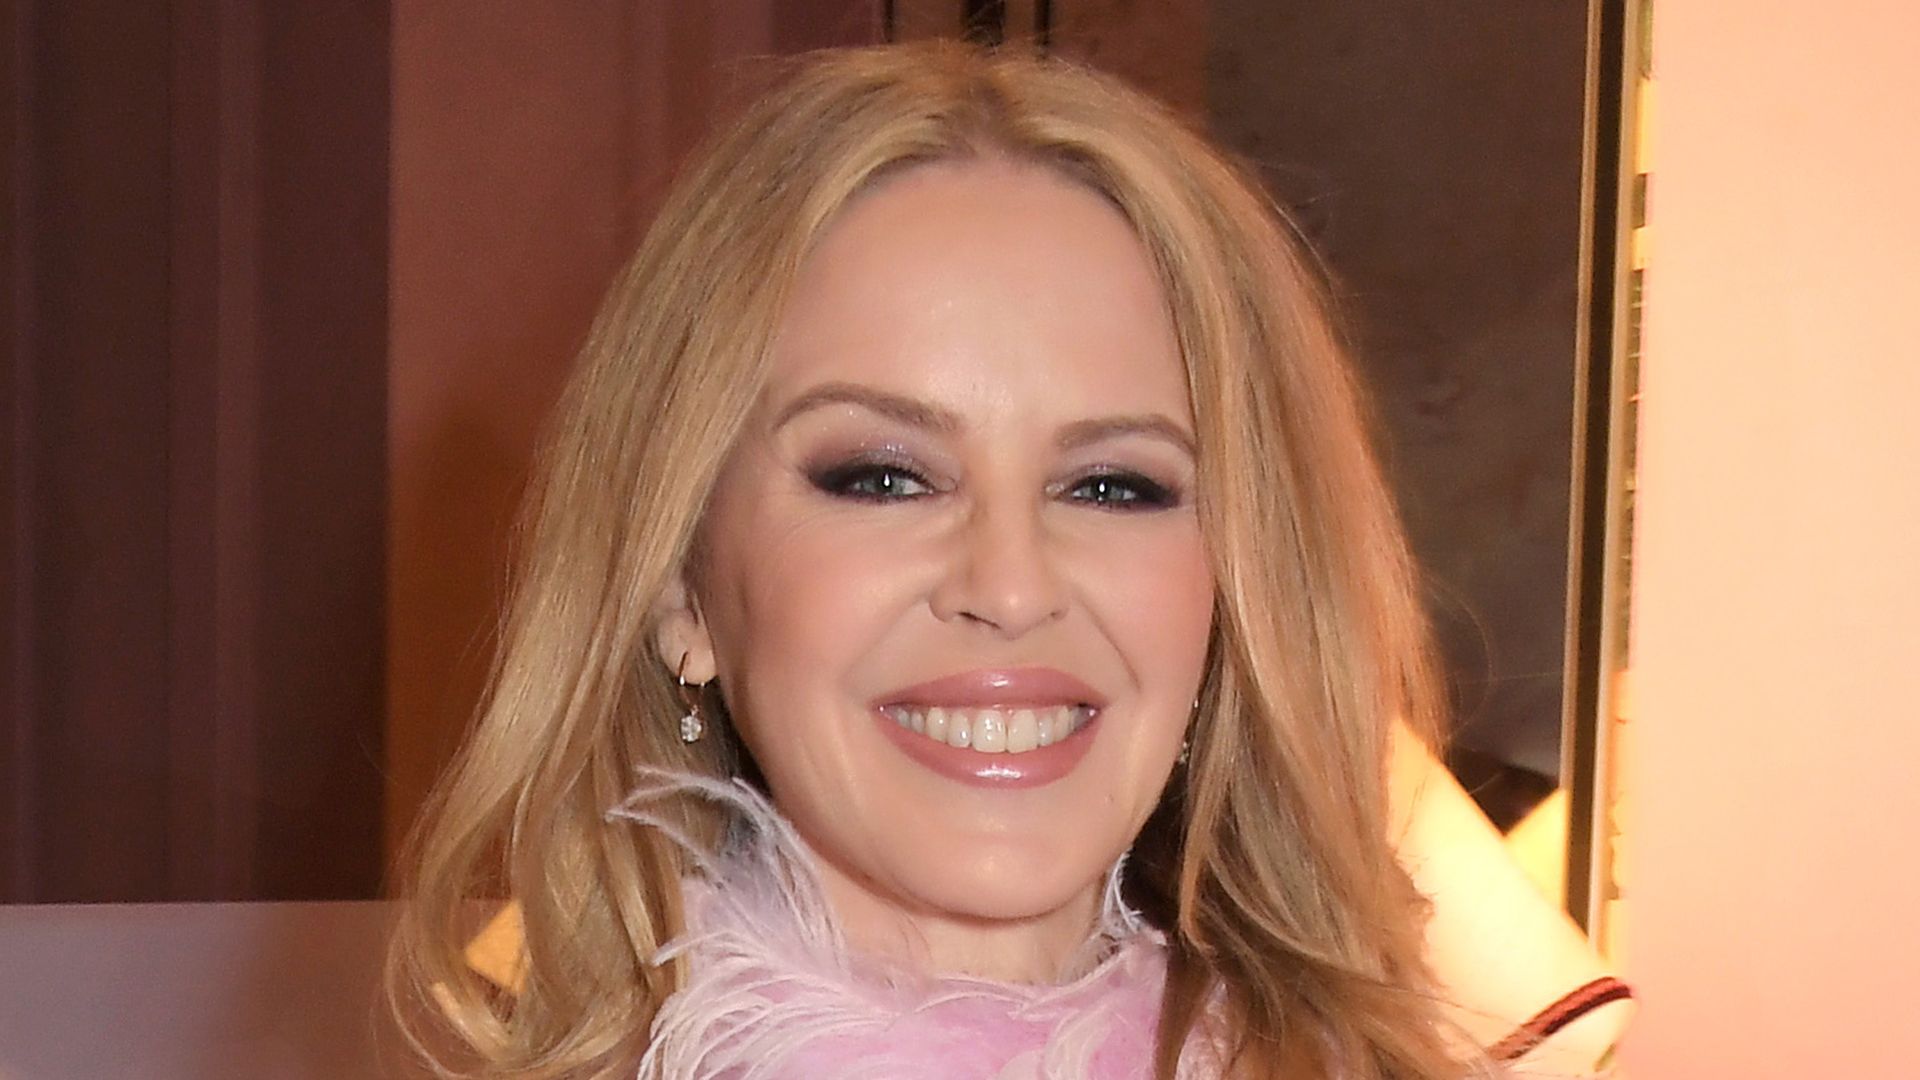 Kylie Minogue sizzles in skintight jumpsuit ahead of major career move